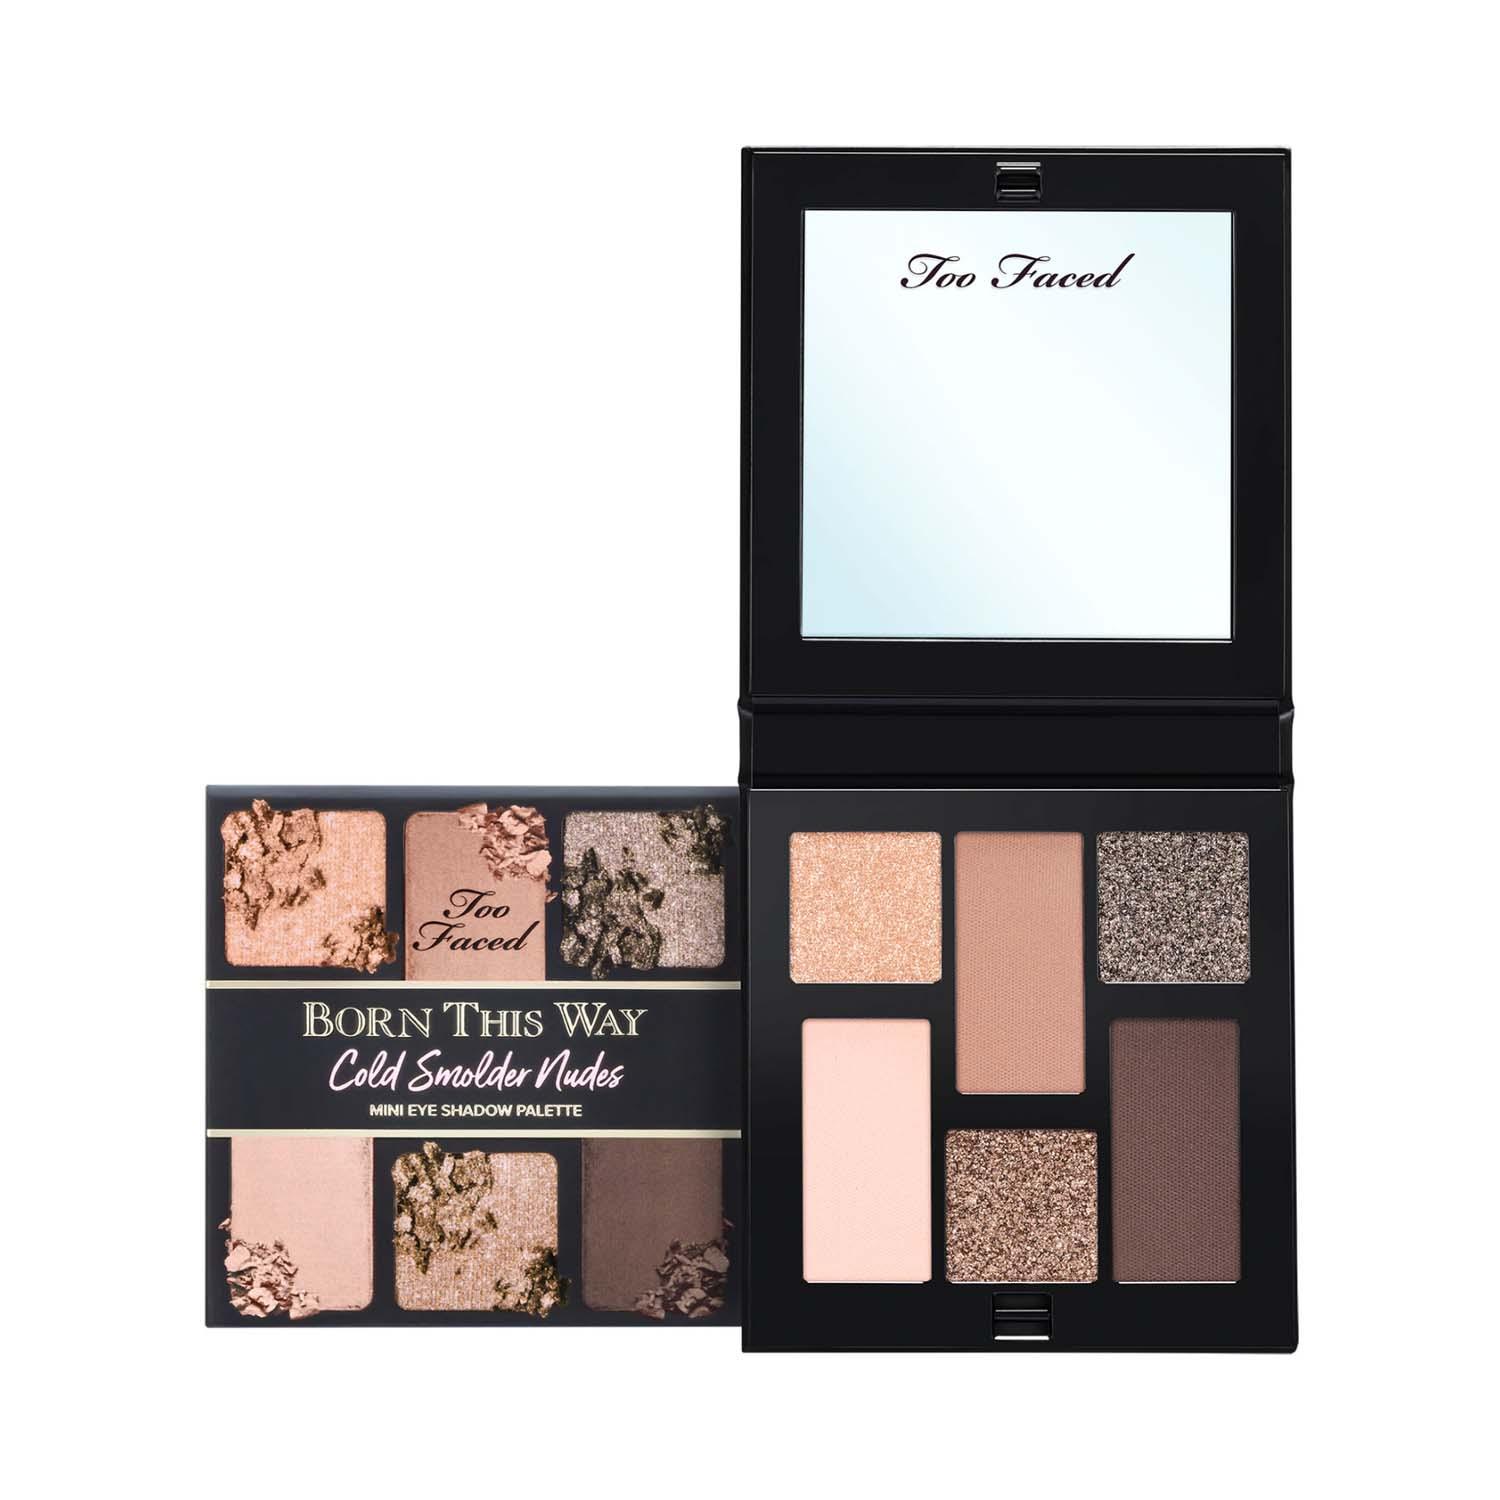 Too Faced | Too Faced Born This Way Nude Mini Eyeshadow Palette - Cold Smolder Nudes (5.7 g)